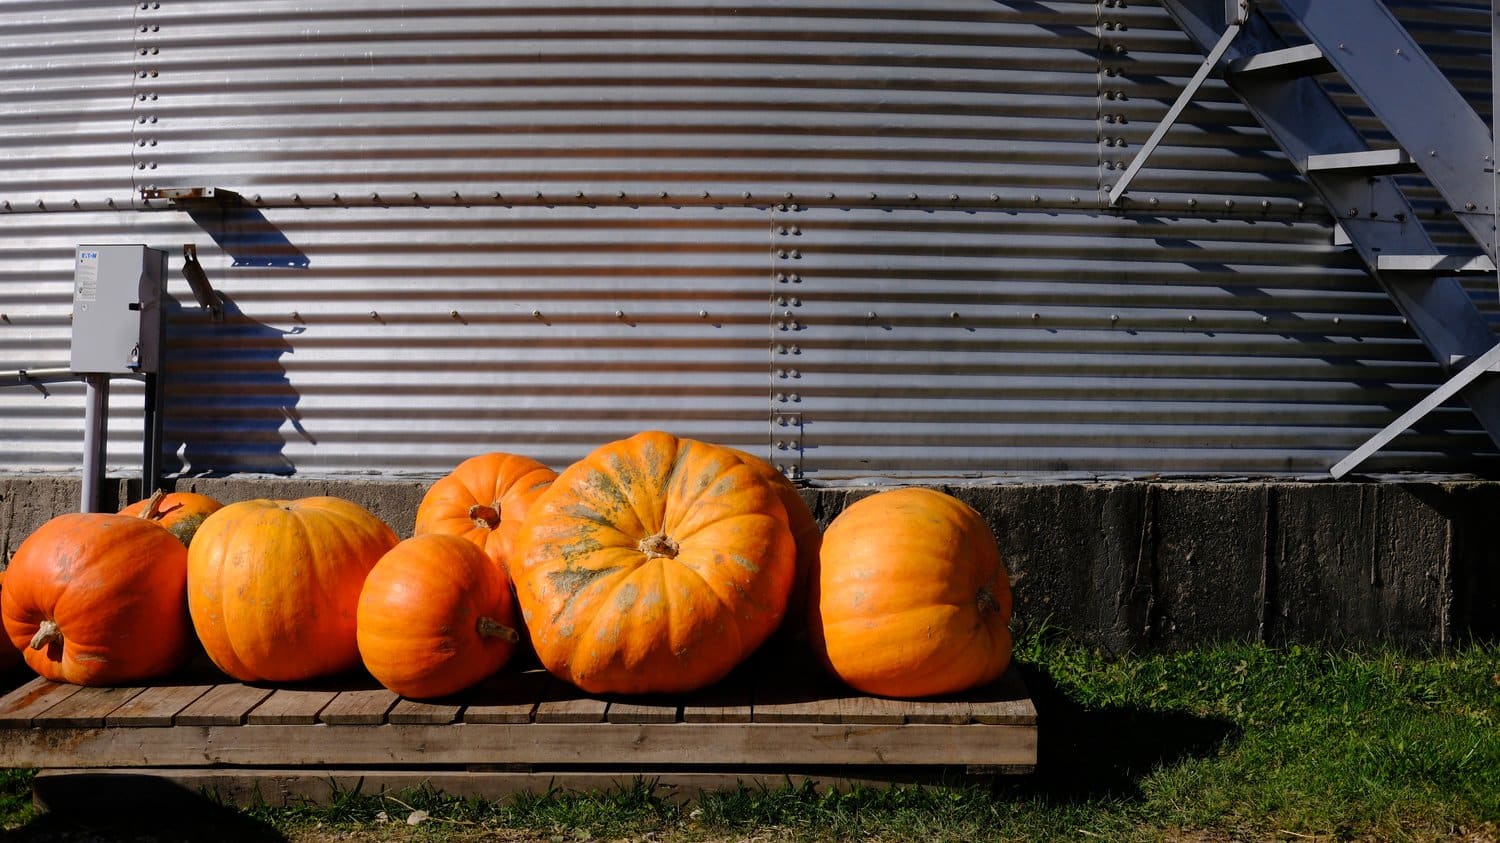 Large pumpkins in front of a grain silo.